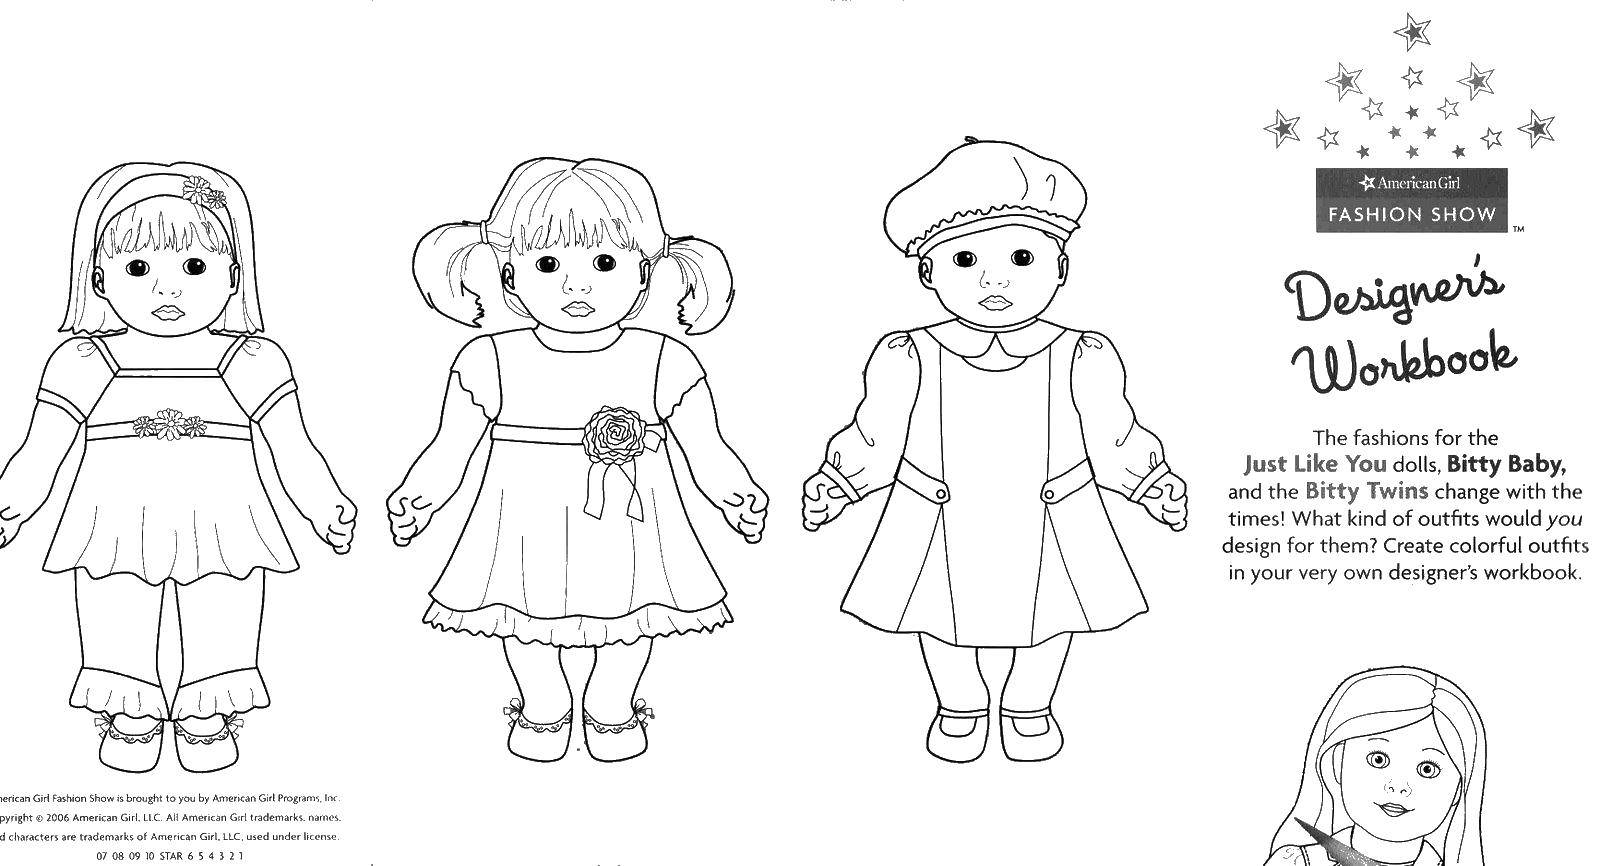 Coloring Kukuly in dresses. Category Dolls. Tags:  doll.